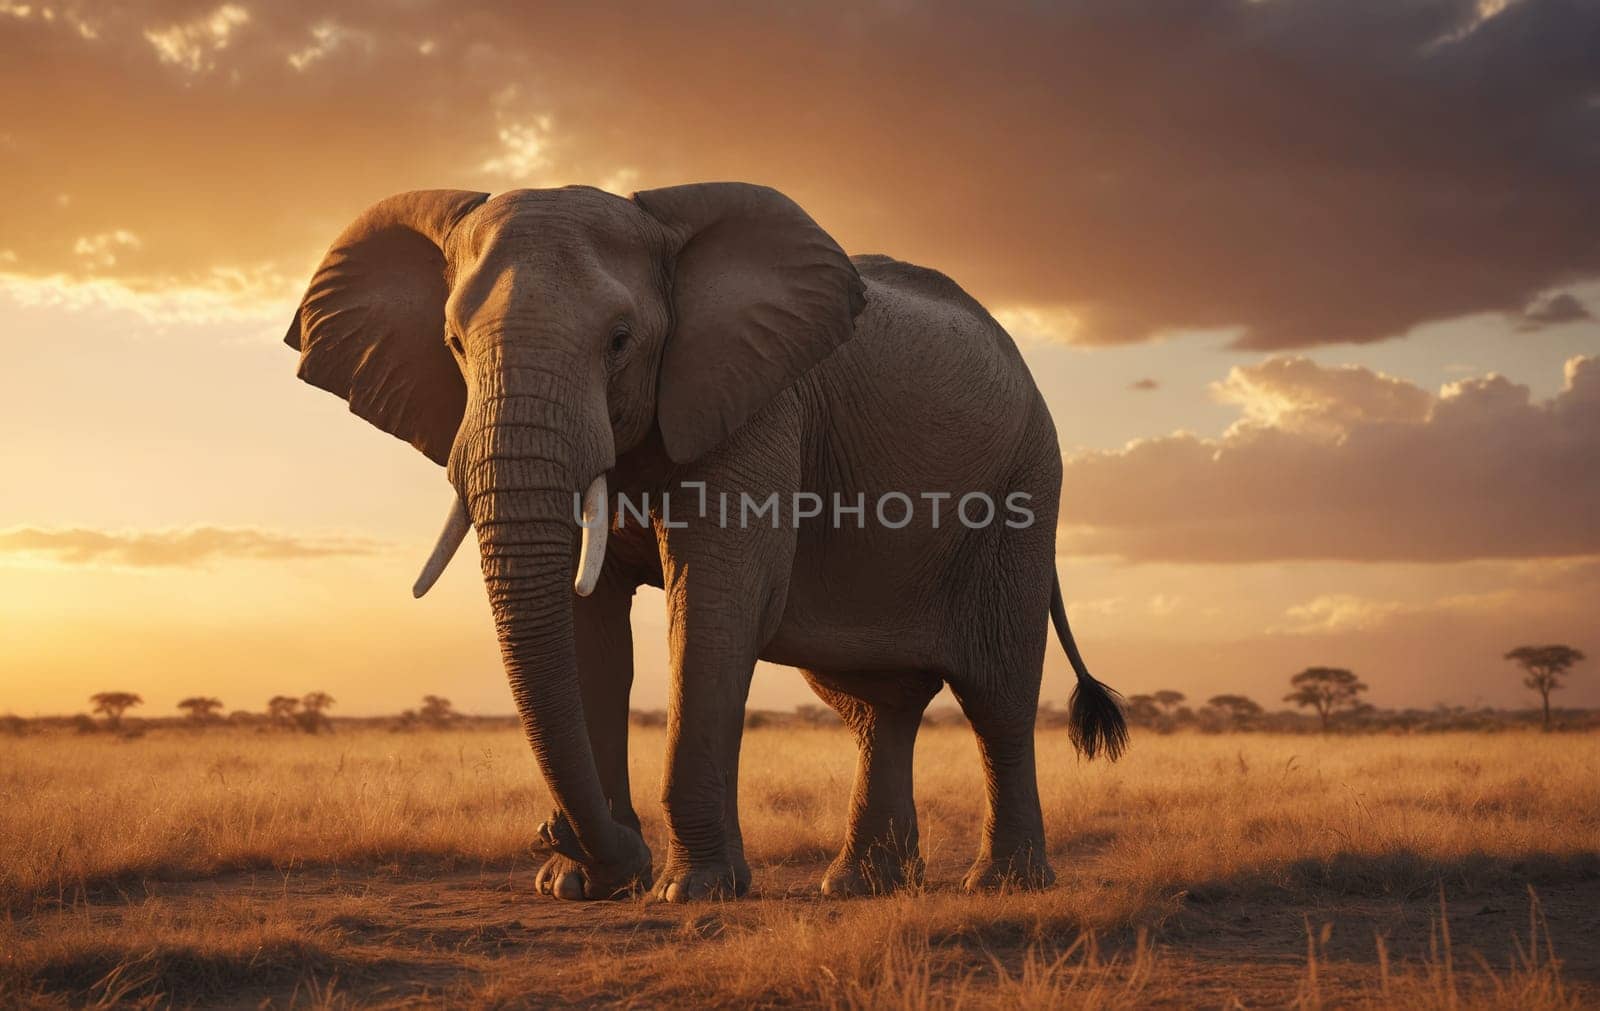 A serene scene of elephants in the wild, captured in their natural habitat at dusk.